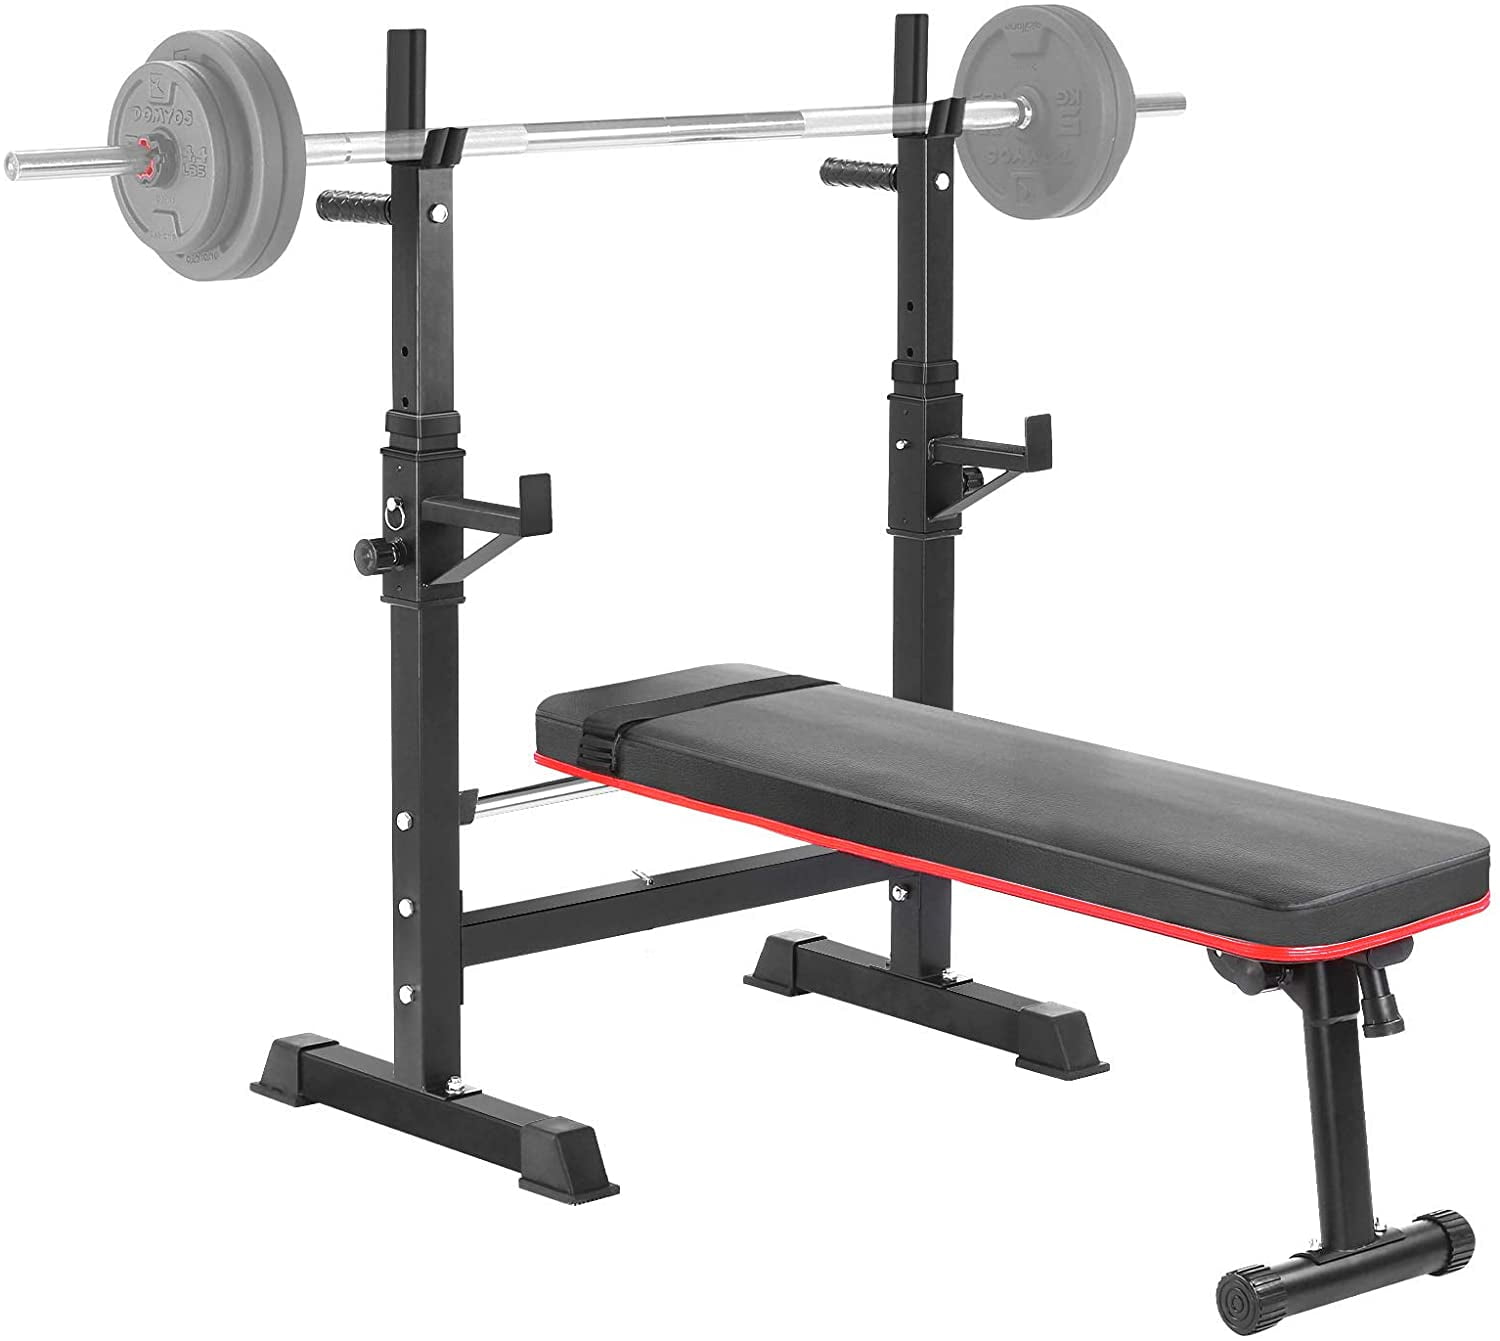 Weight Bench Set Adjustable Home Gym Press Lifting Barbell Exercise Workout 440 